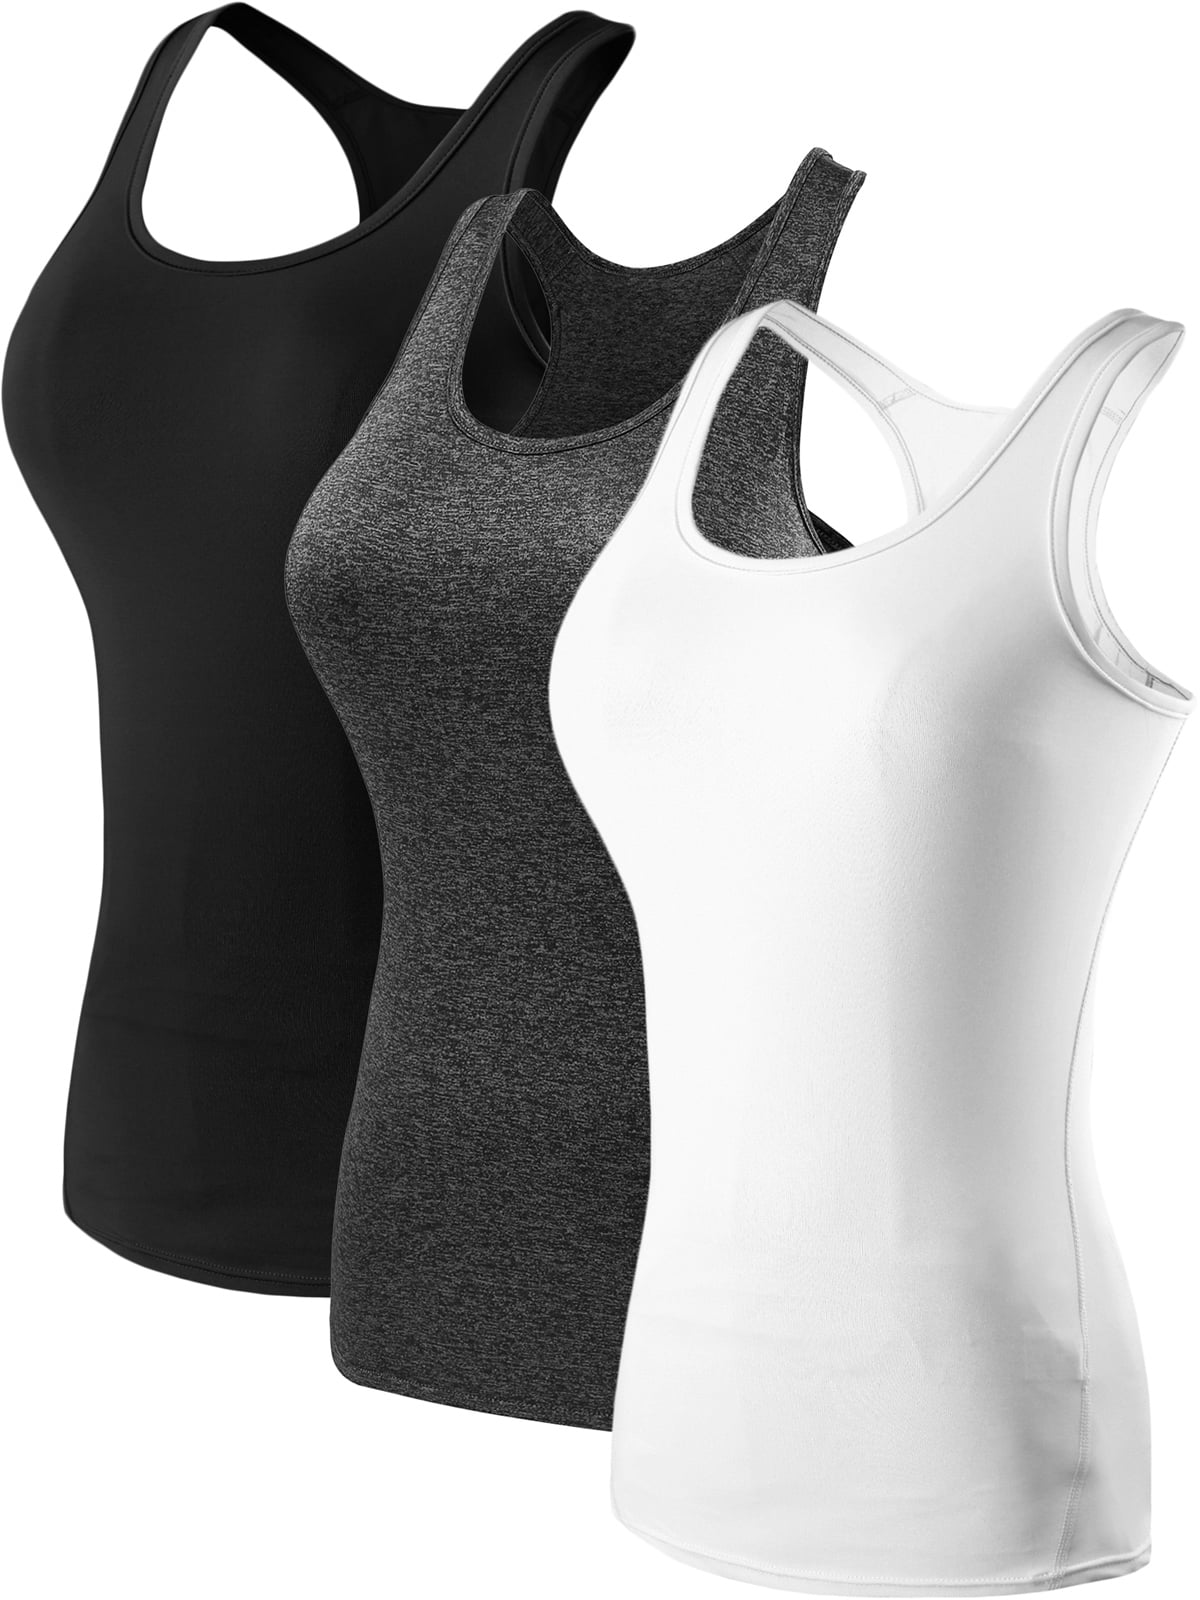 Layer 3 Top Size Womens Base Pack,Black+Gray+White,US NELEUS Tank Dry Compression Fit XS